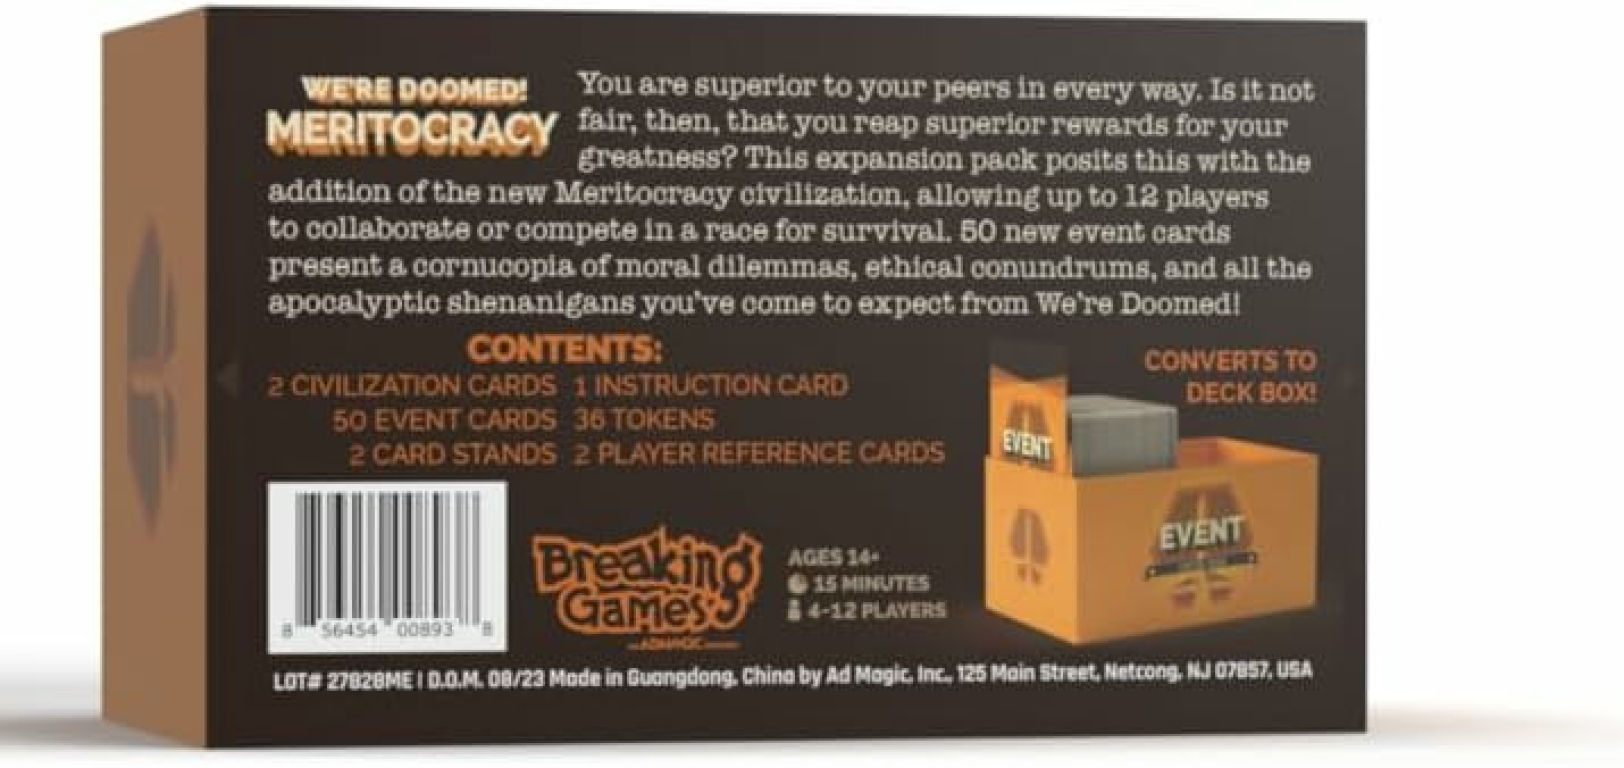 We're Doomed: Meritocracy Expansion Pack back of the box